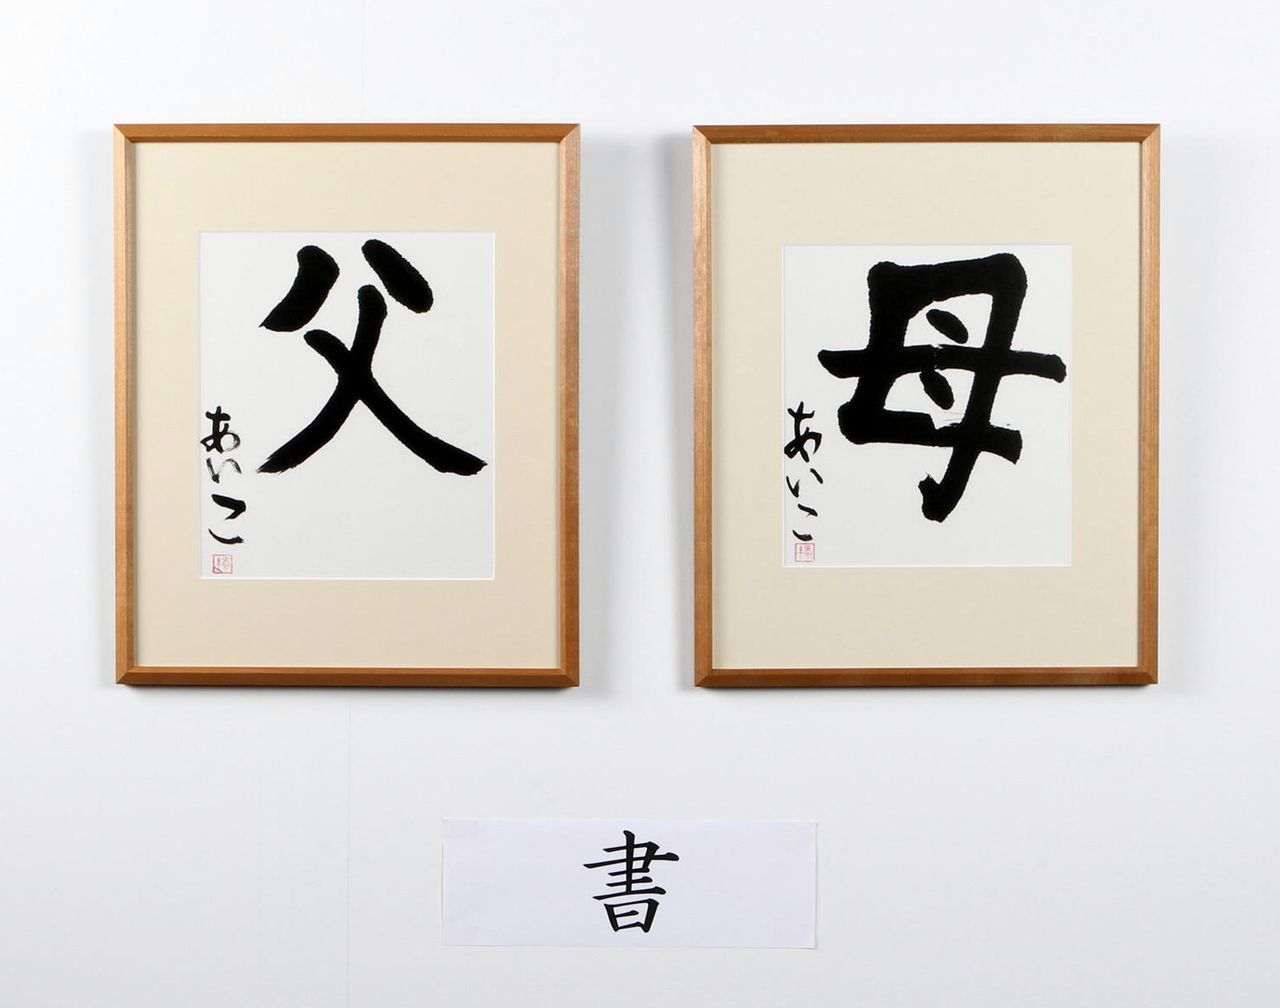 Princess Aiko’s calligraphy entry with the kanji for “father” (left) and “mother” in the IHA staff culture and art festival in December 2012. (Courtesy Imperial Household Agency; © Jiji)